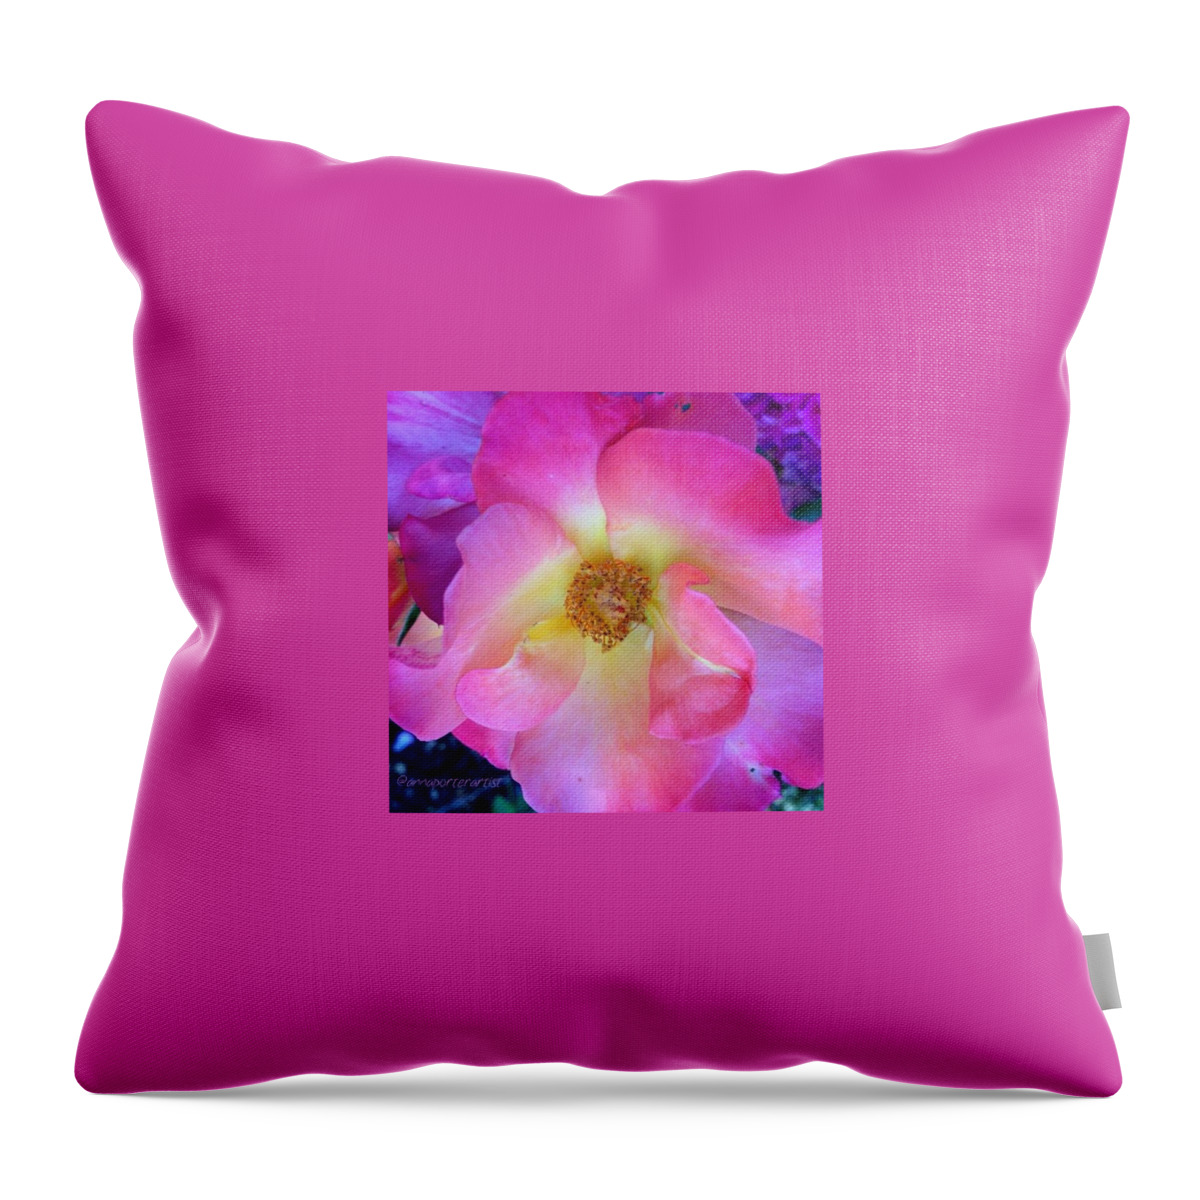 Flowers Throw Pillow featuring the photograph The Heart Of The Matter by Anna Porter